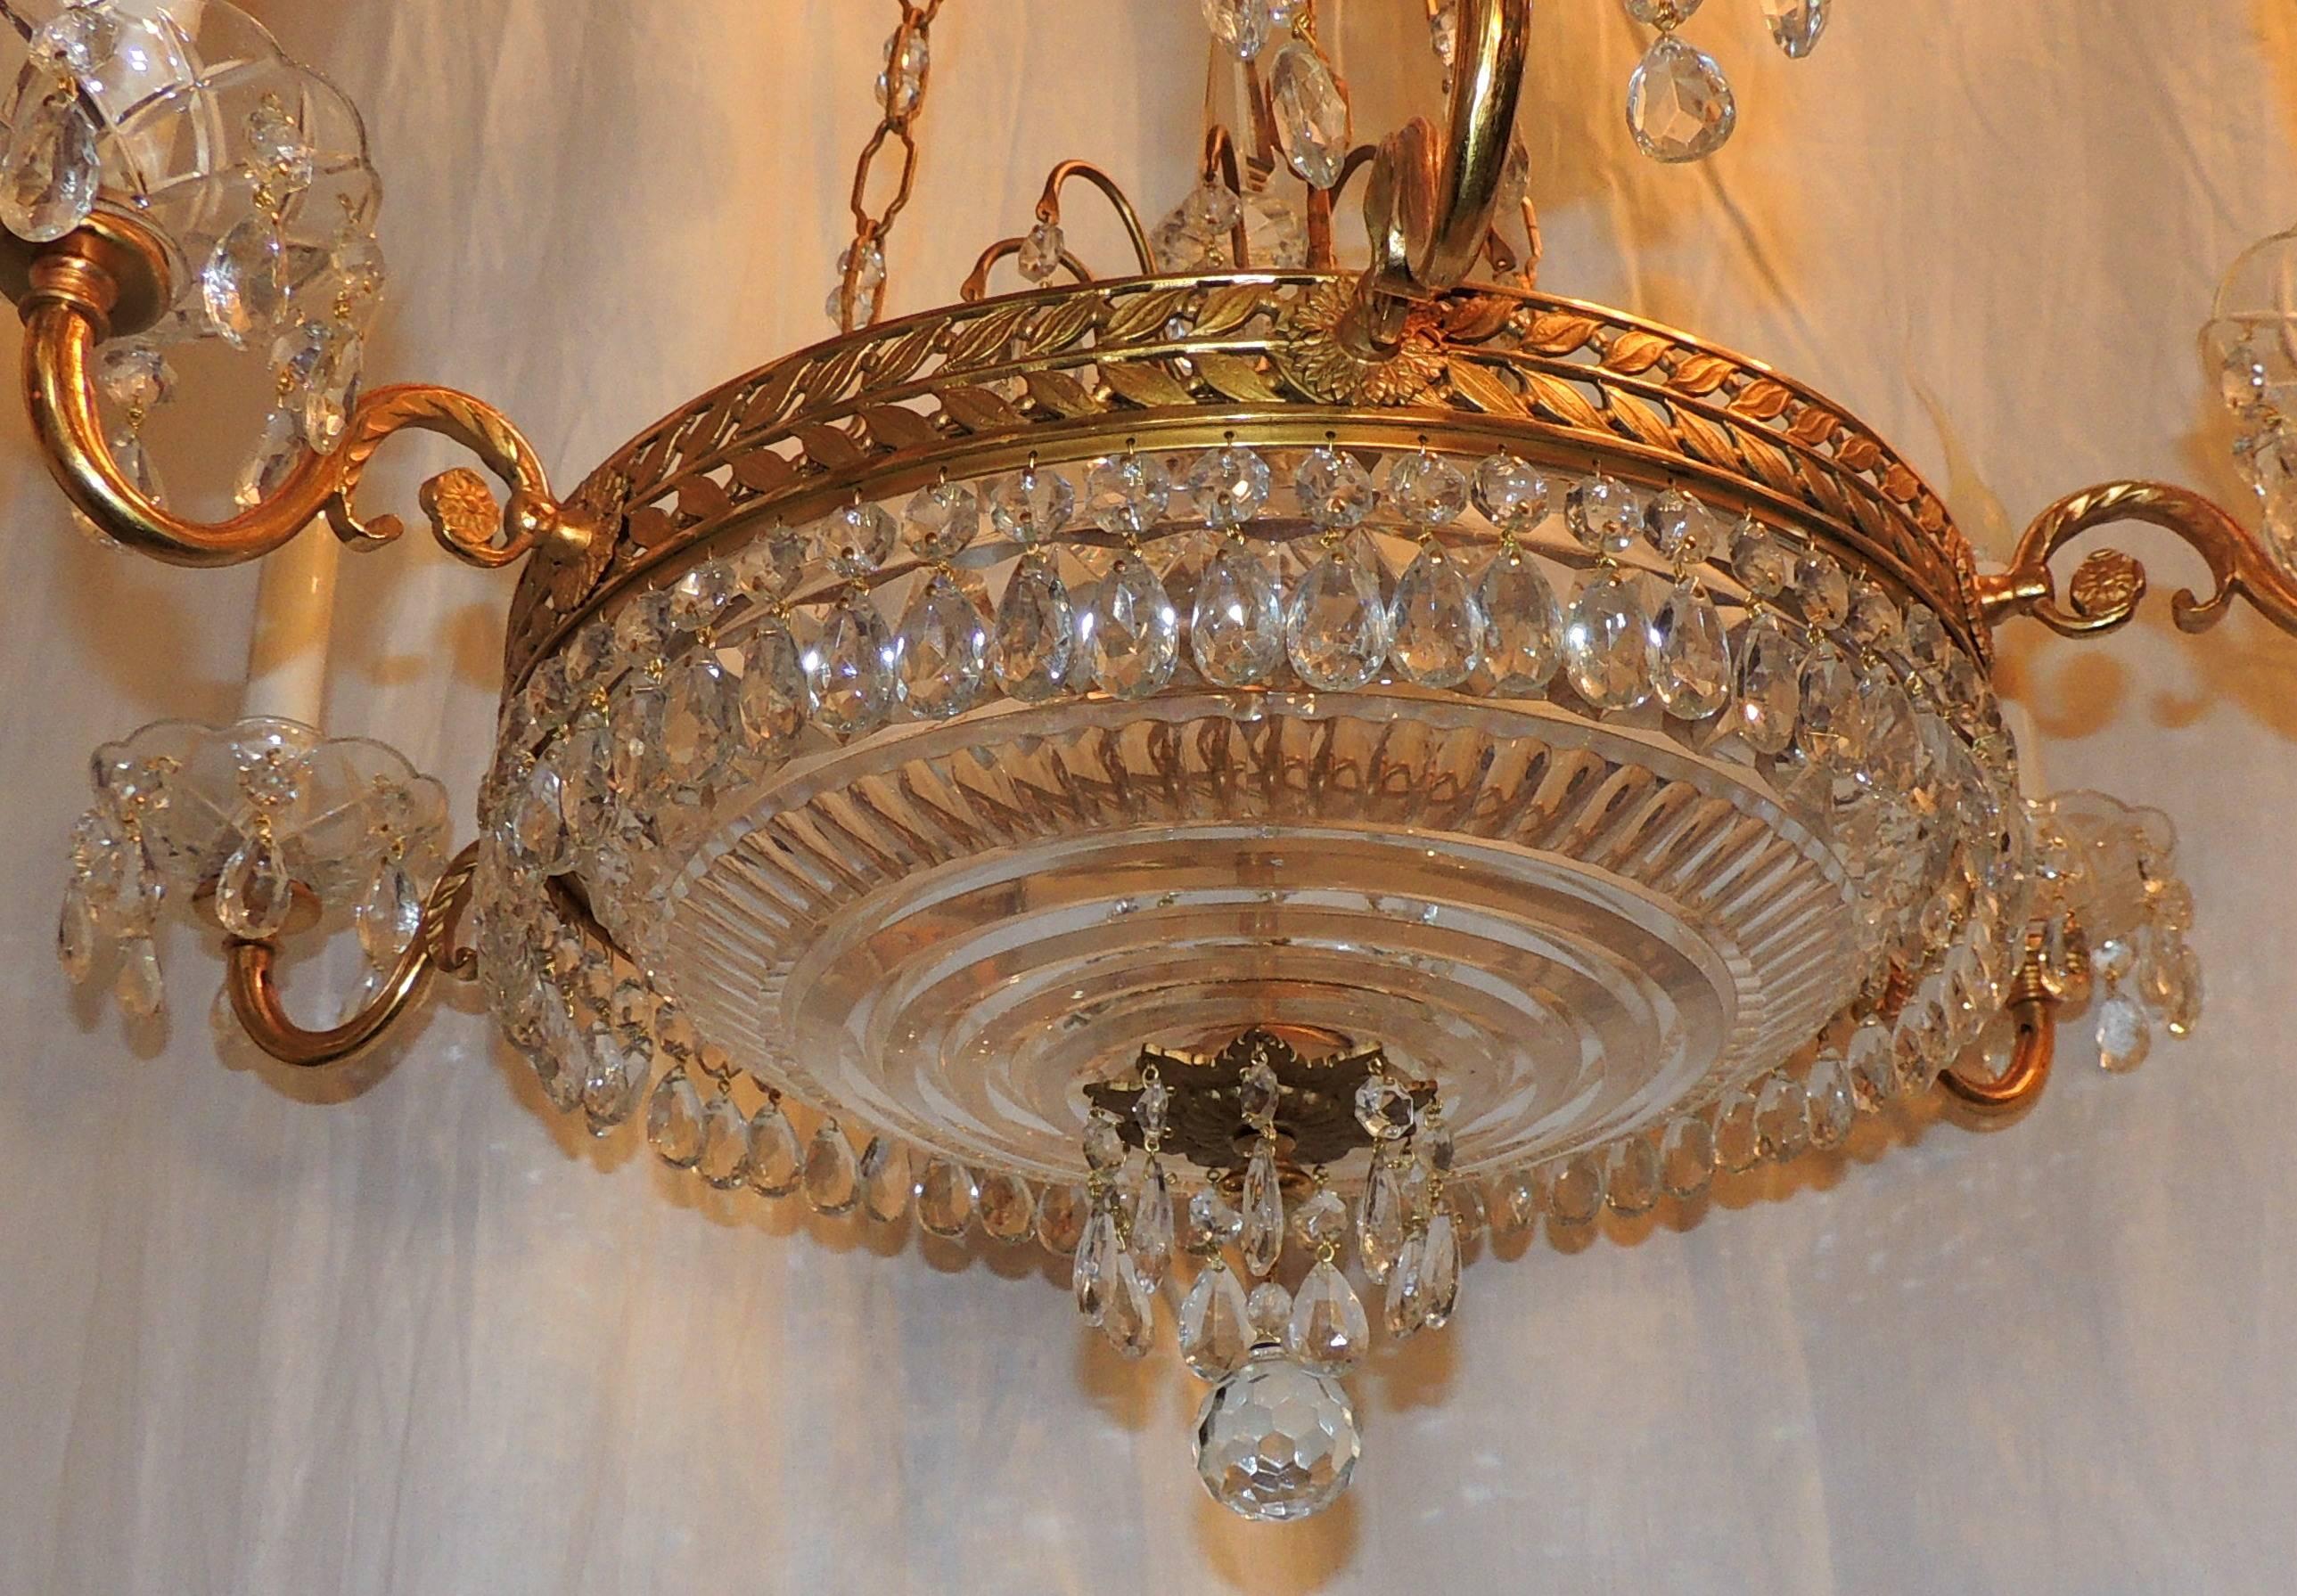 Early 20th Century Wonderful French Dore Bronze Neoclassical Baltic Crystal Bowl Empire Chandelier For Sale